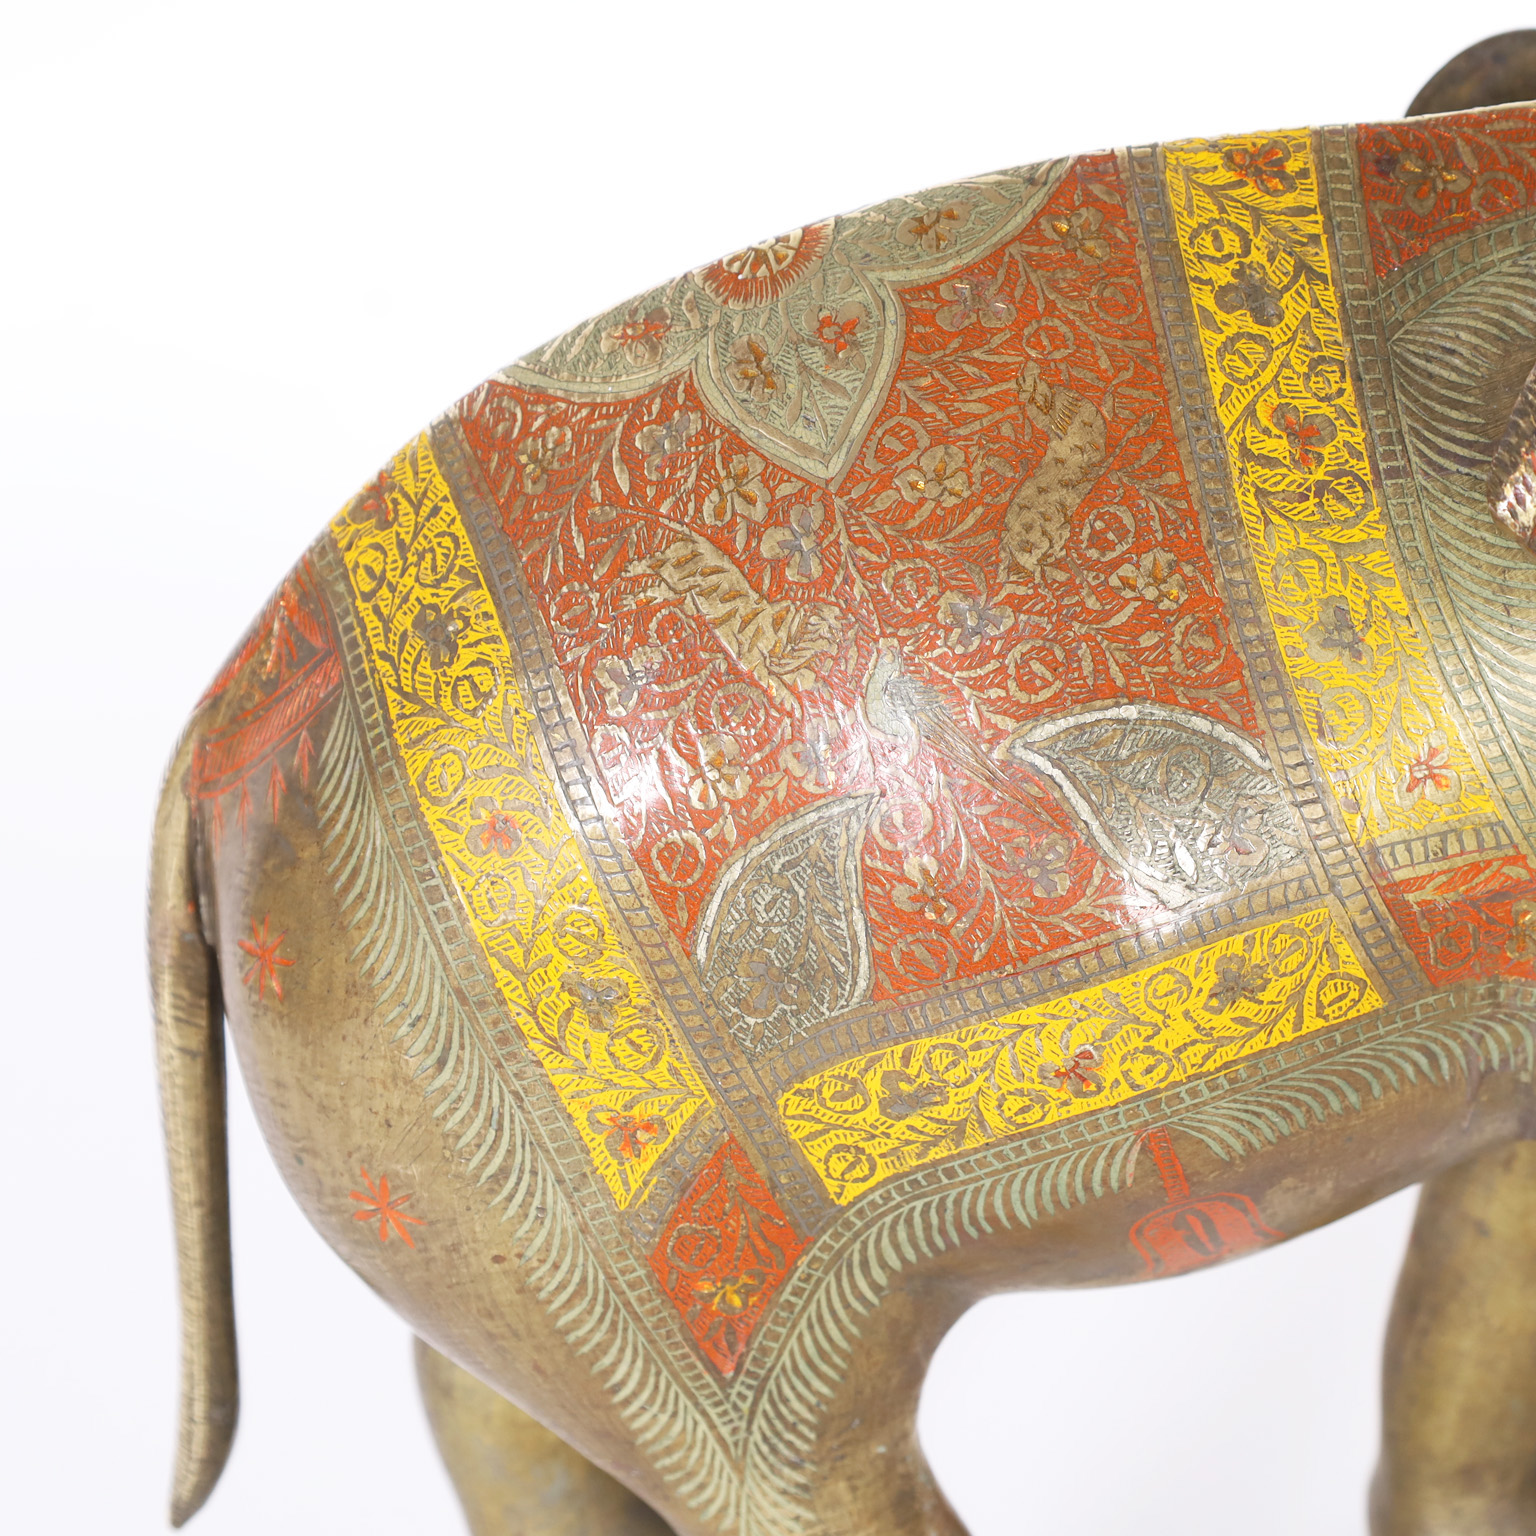 Anglo Indian Cast Brass Elephant with Enamel